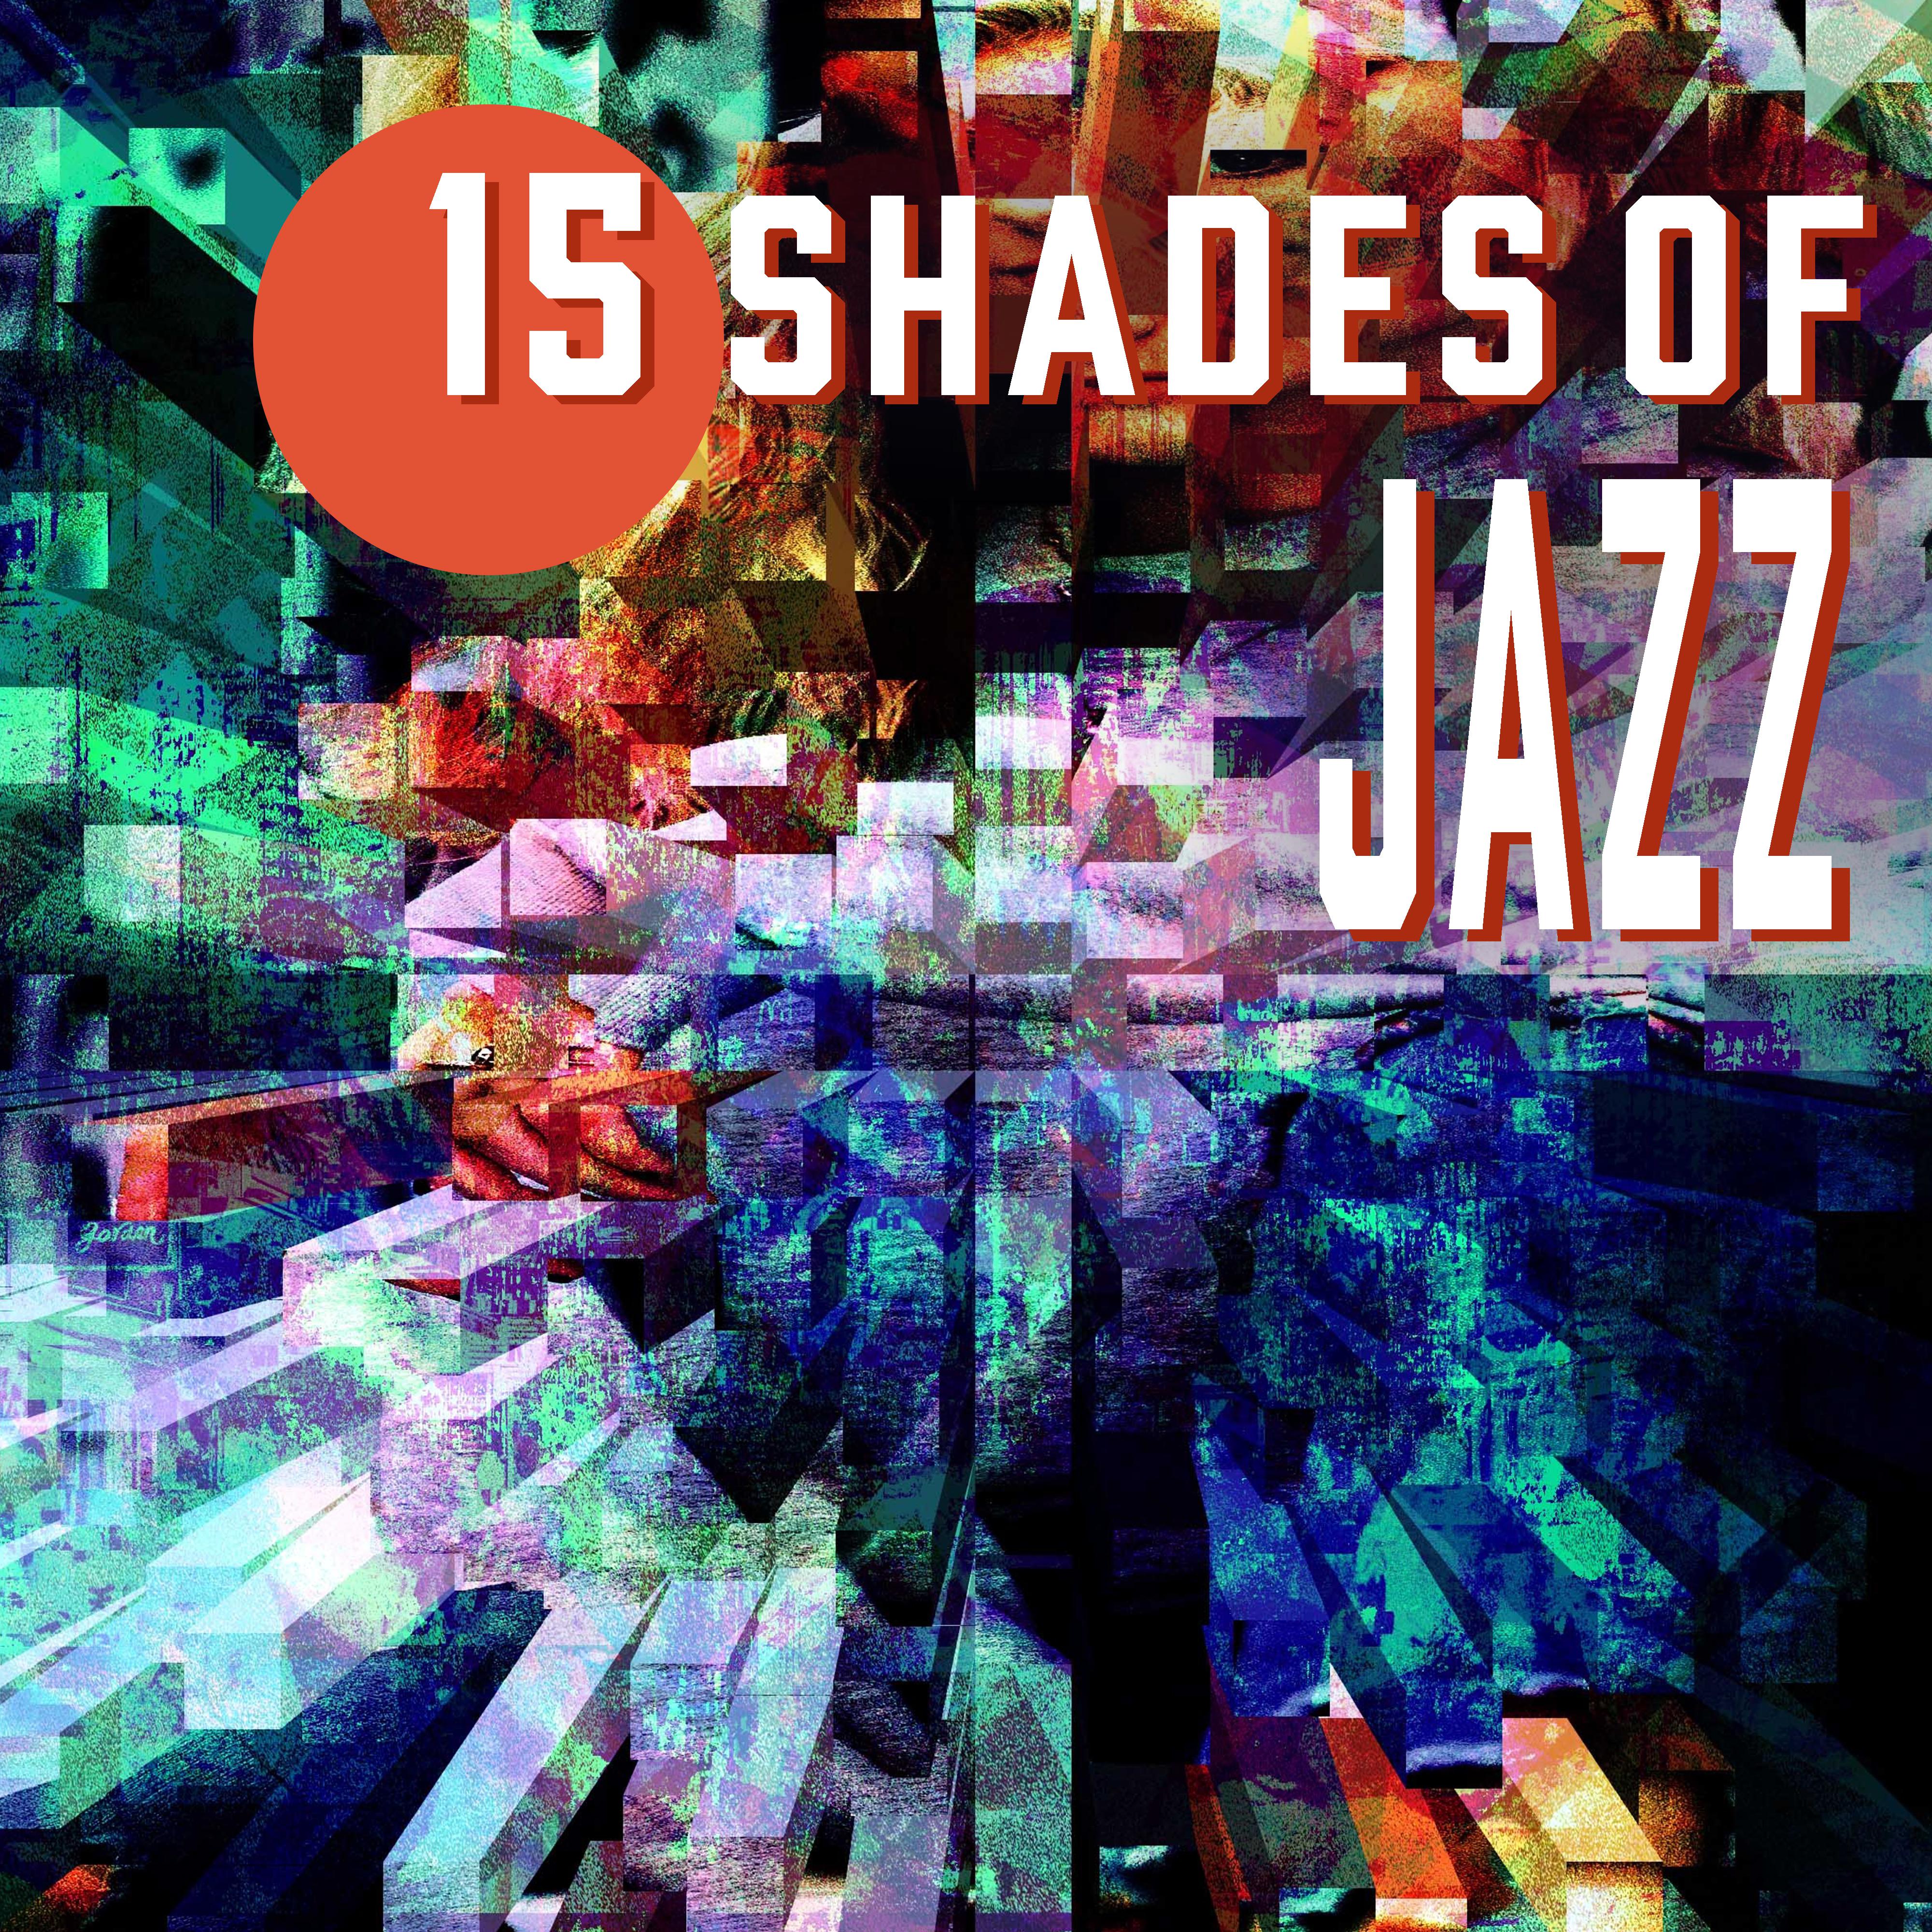 15 Shades of Jazz  Soft Music for Relaxation, Chill Out, Stress Relief, Sounds of Piano, Pure Rest, Night Jazz Sounds